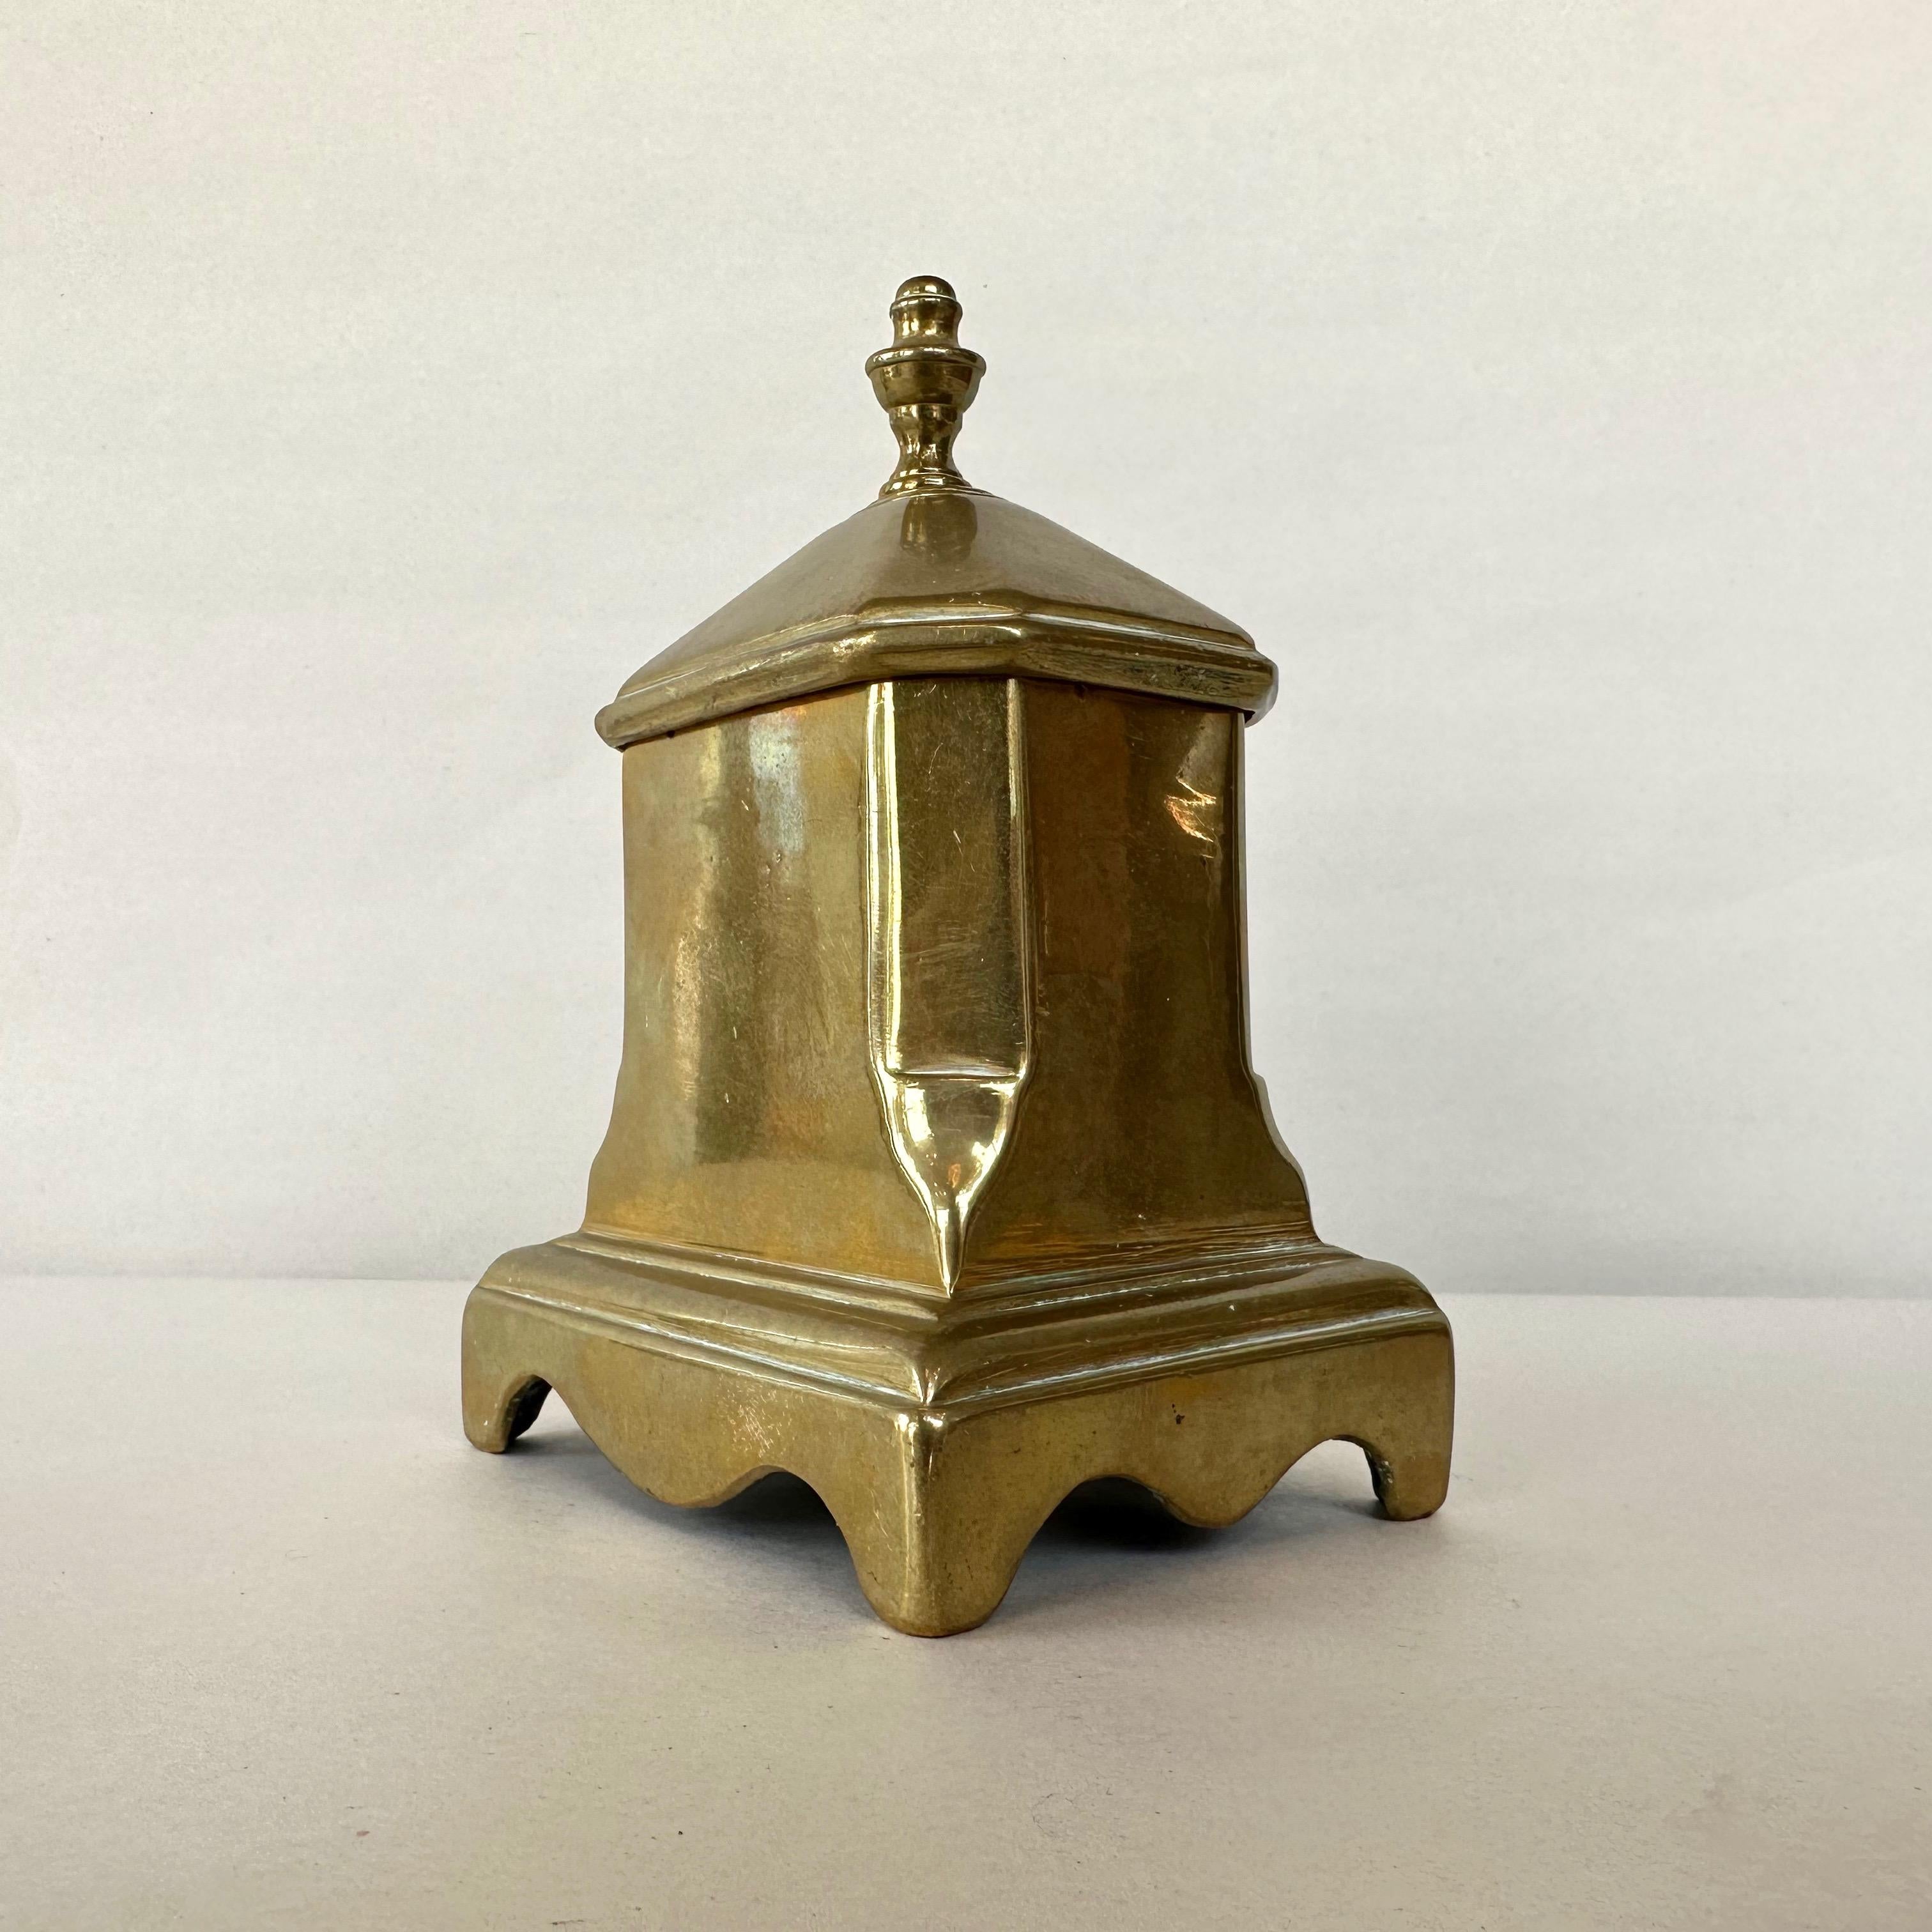 Antique American Queen Anne Period Lidded Brass Tobacco Box, circa 1750 In Good Condition For Sale In San Francisco, CA